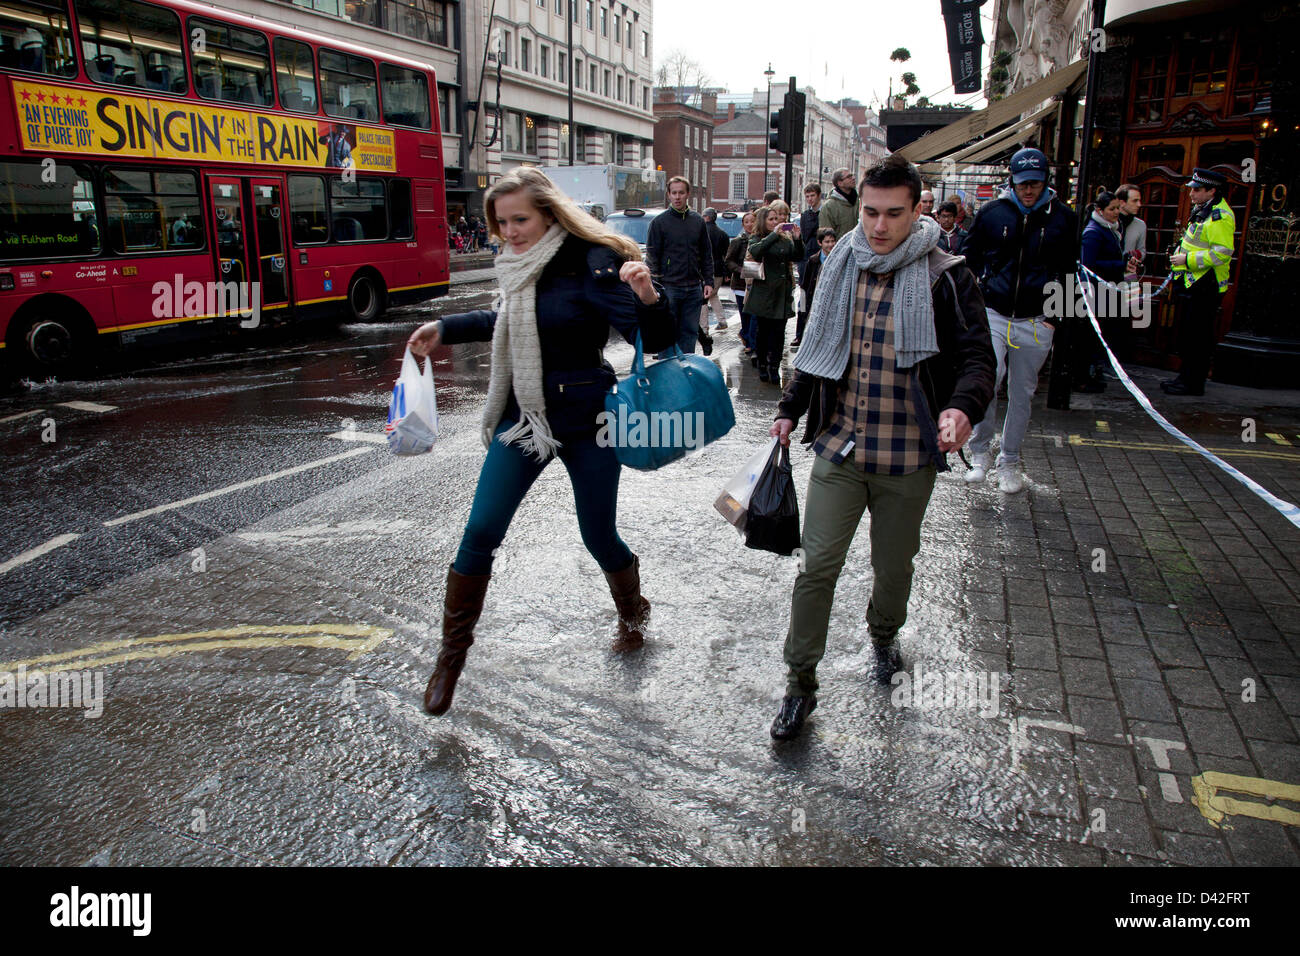 London, UK. Saturday 2nd March 2013. Burst water main causes flooding disruption in central London. People run through the flowing water. Stock Photo